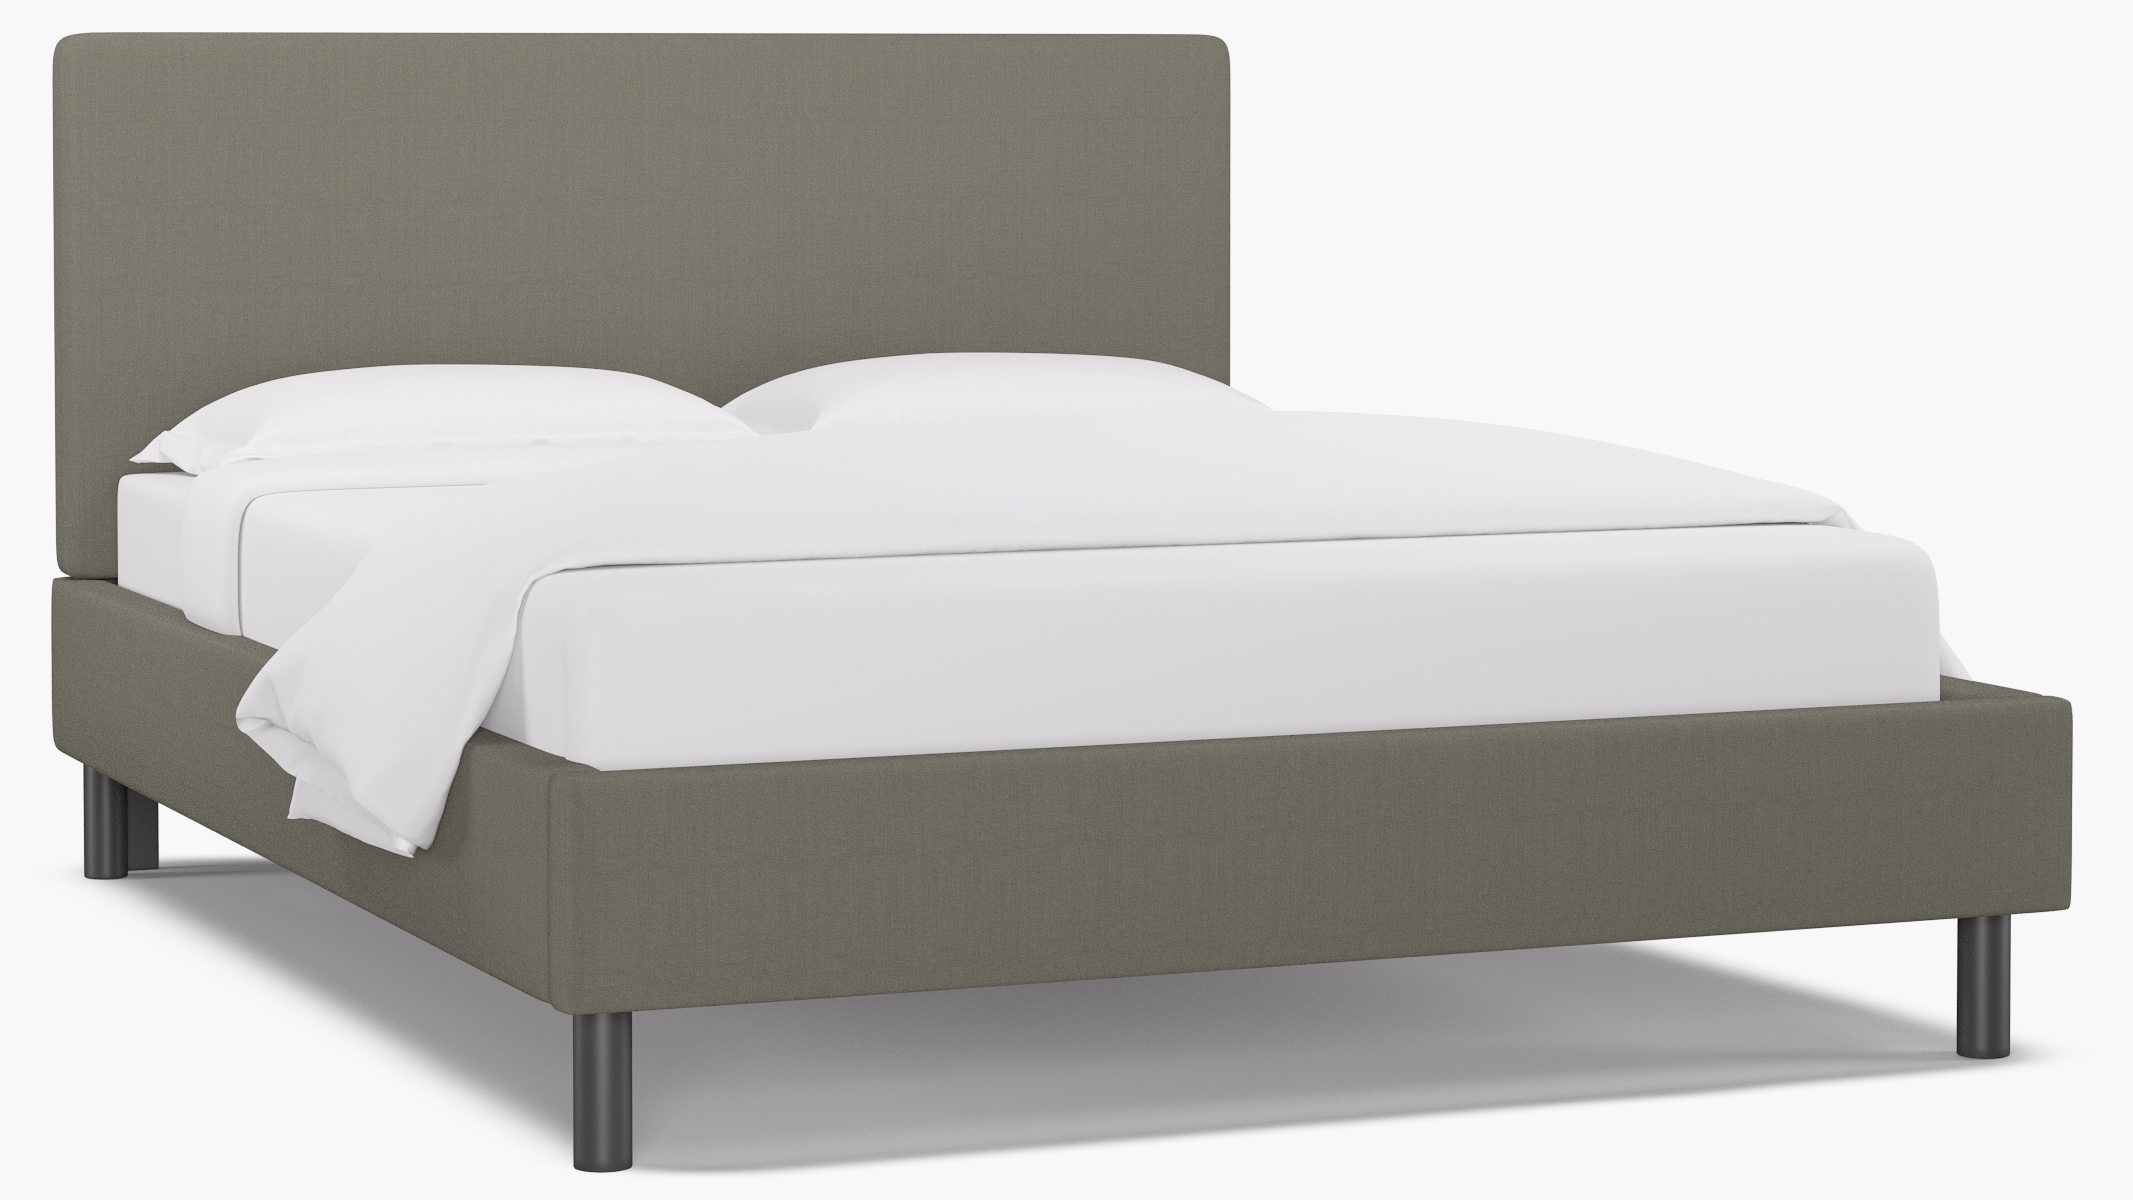 Tailored Platform Bed, Putty Everyday Linen, Queen - Image 1